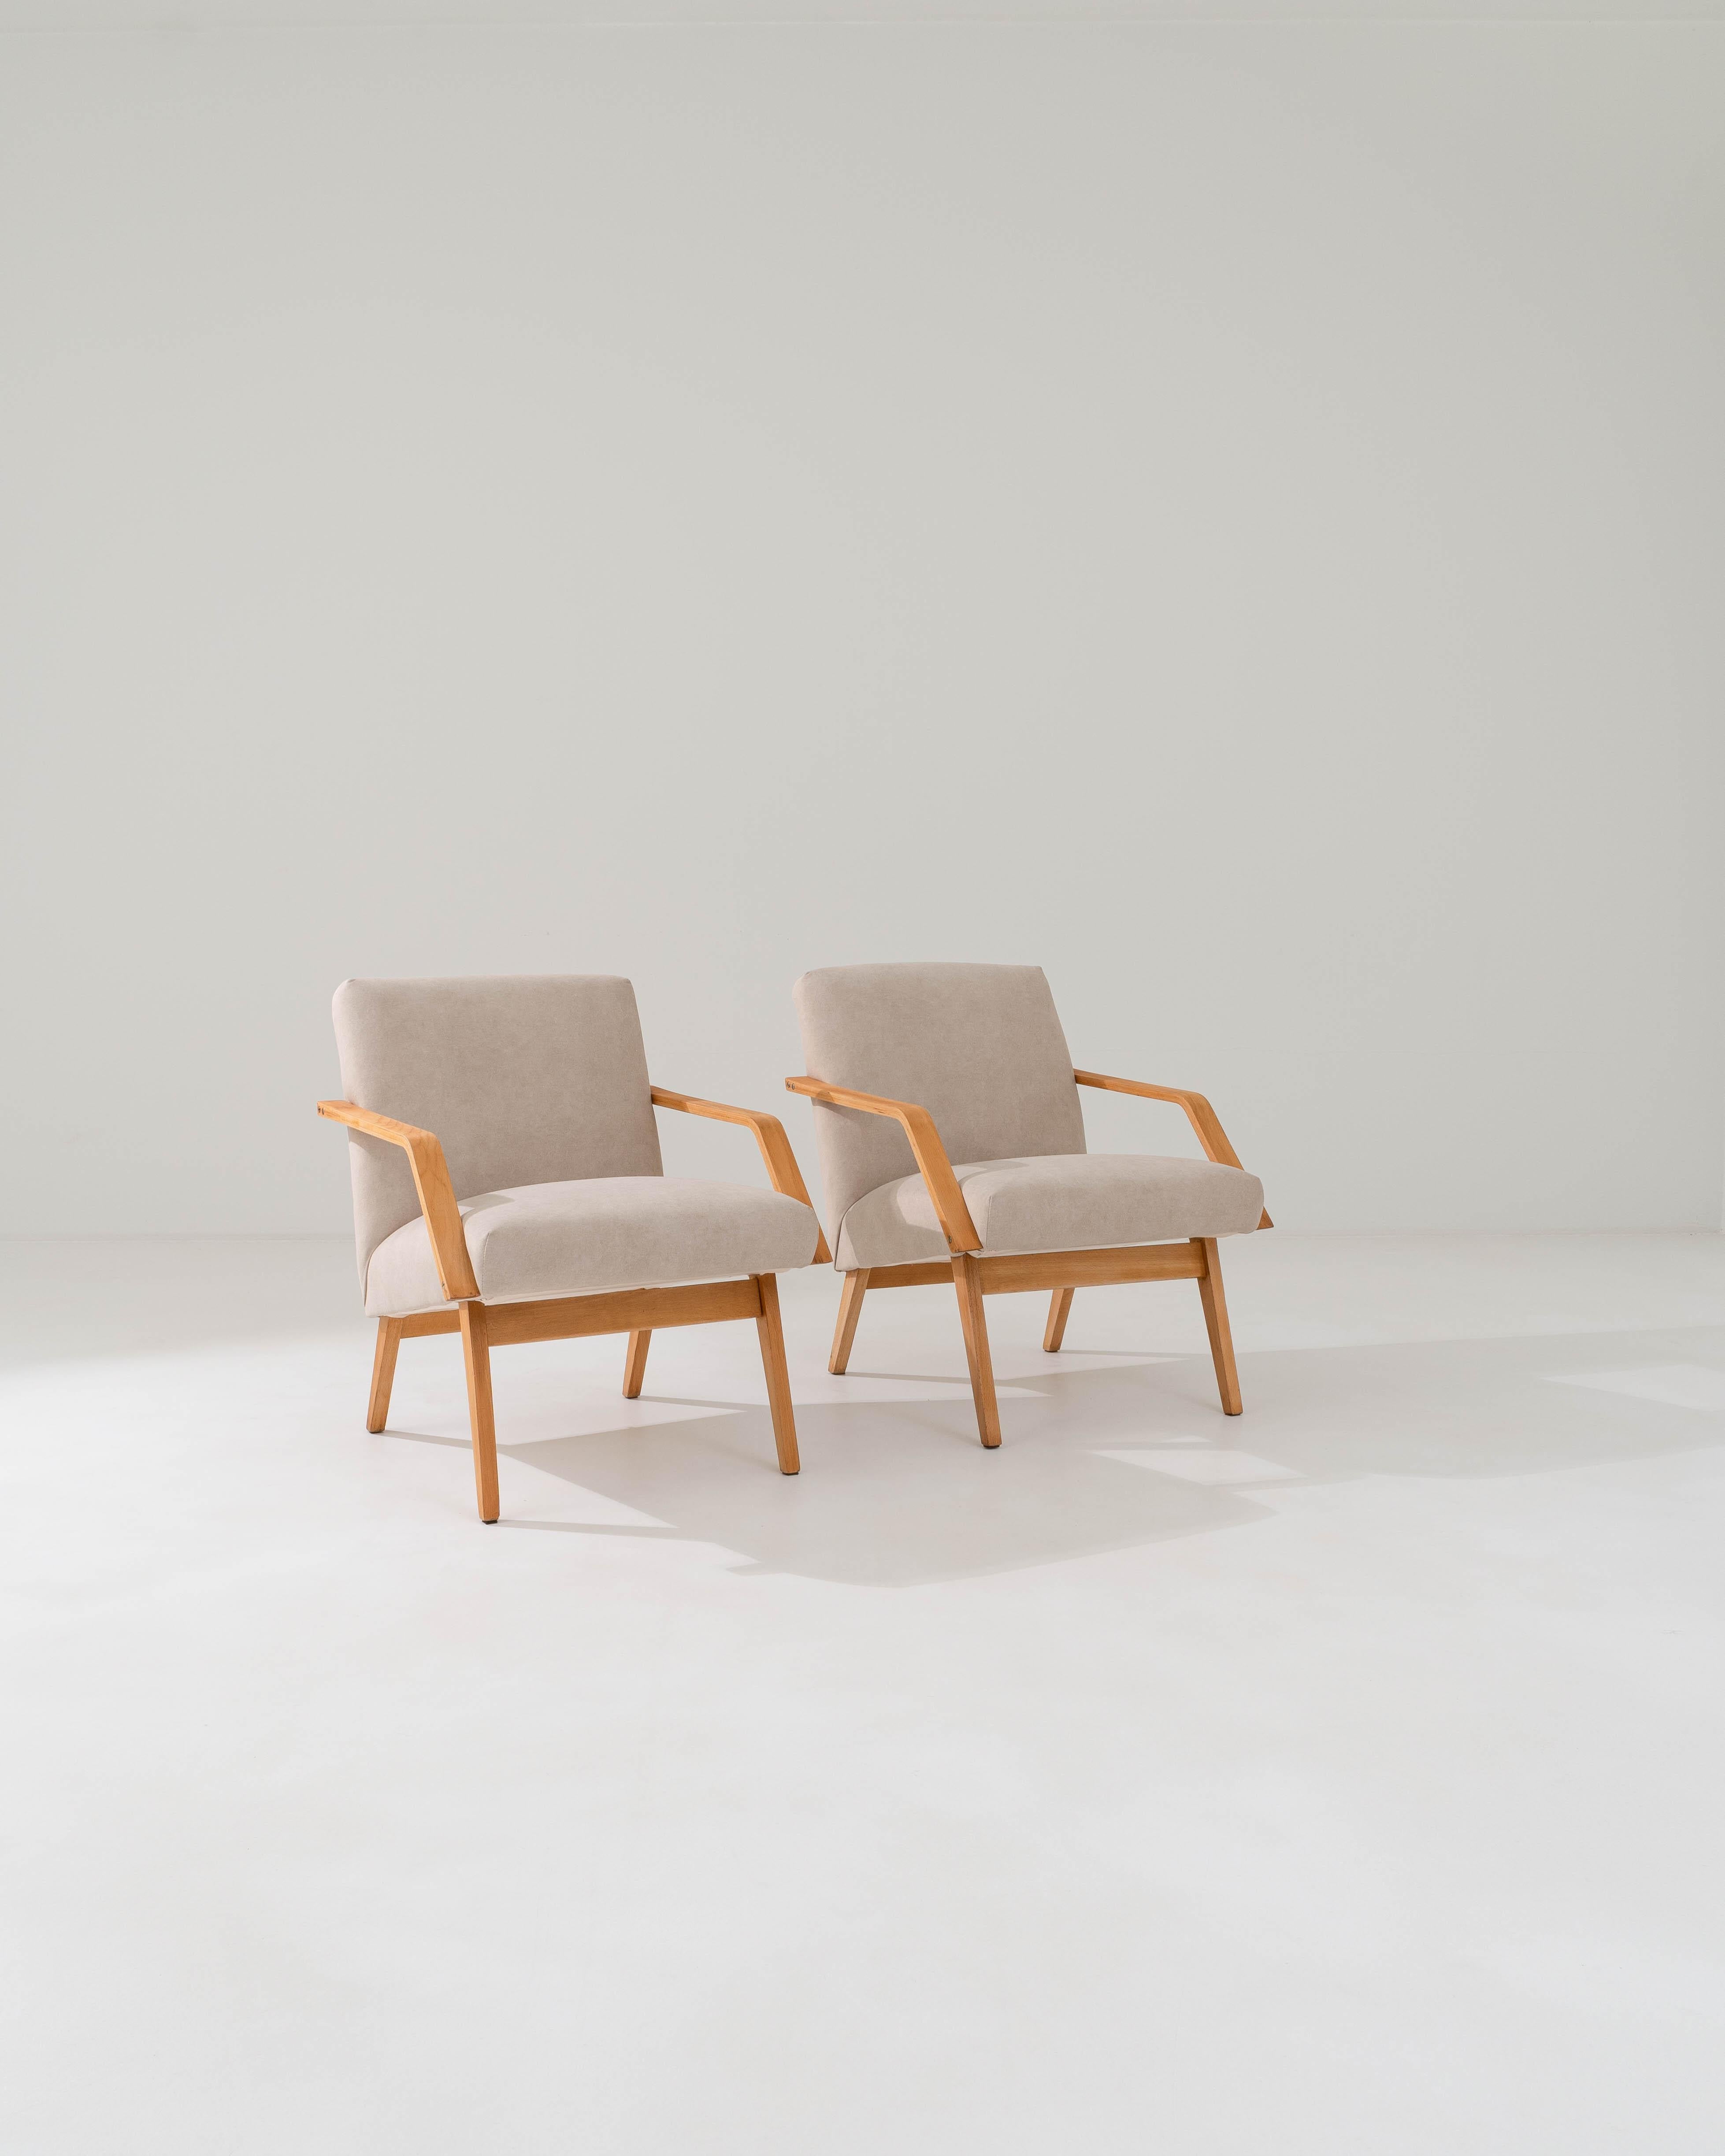 Light and stylish, this pair of Mid-Century armchairs showcase the sophistication of Central European Modernist design. Built in Czechia in the 1960s, the clean angles of the tapered legs and slender bentwood armrests create an eye-catching profile.